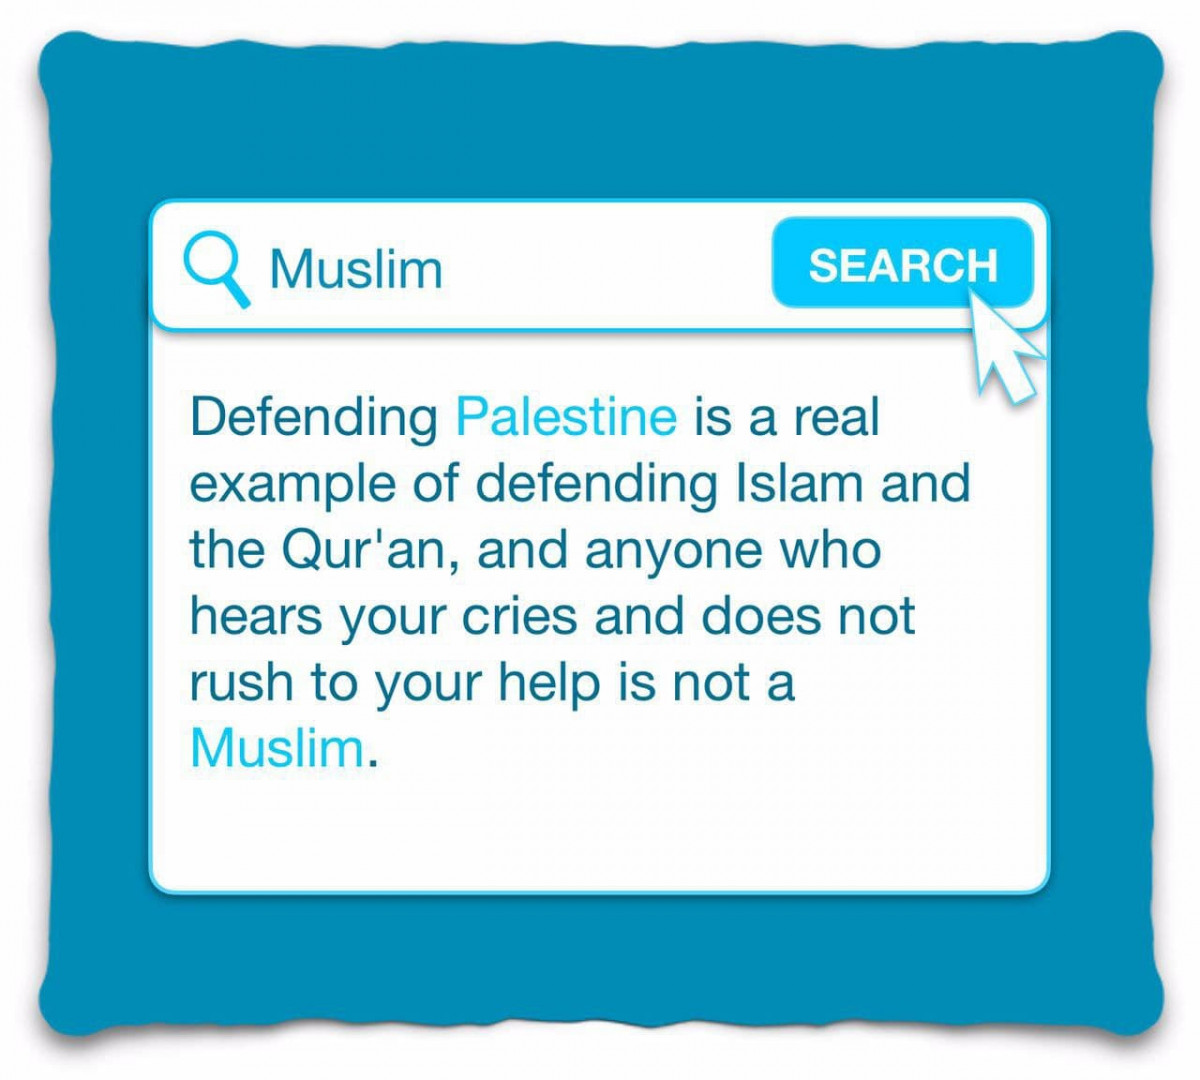 Defending Palestine is a real example of defending Islam and the Qur'an